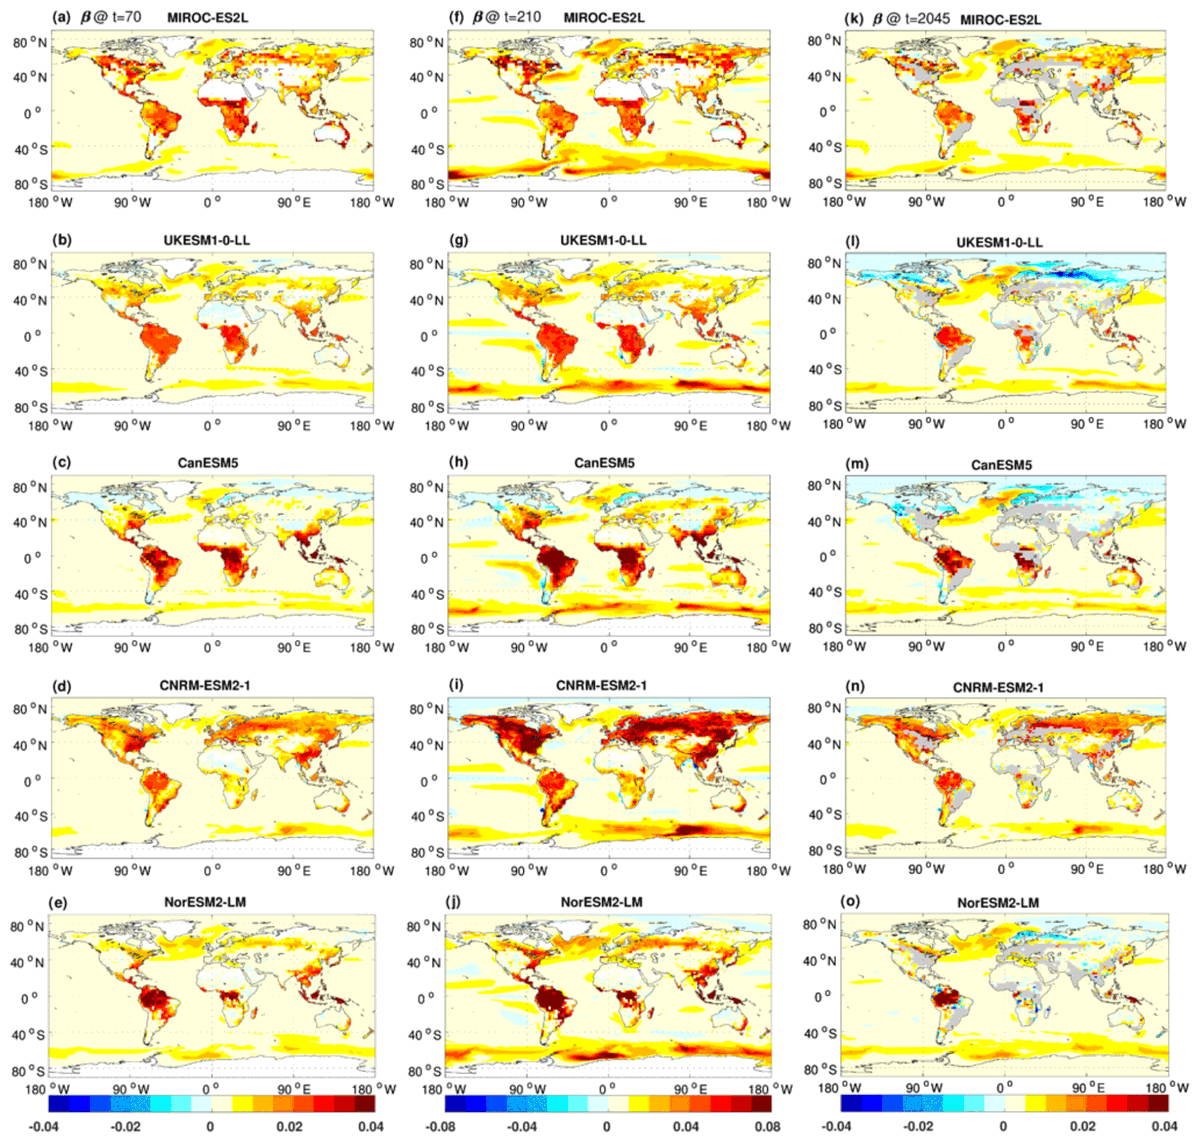 In a recent study, RESCUE researchers investigated the carbon cycle feedbacks under idealized and more realistic overshoot scenarios in an ensemble of Earth system models. ➡️Read the study findings here: doi.org/10.5194/bg-21-… (image: fig. 9 from paper)